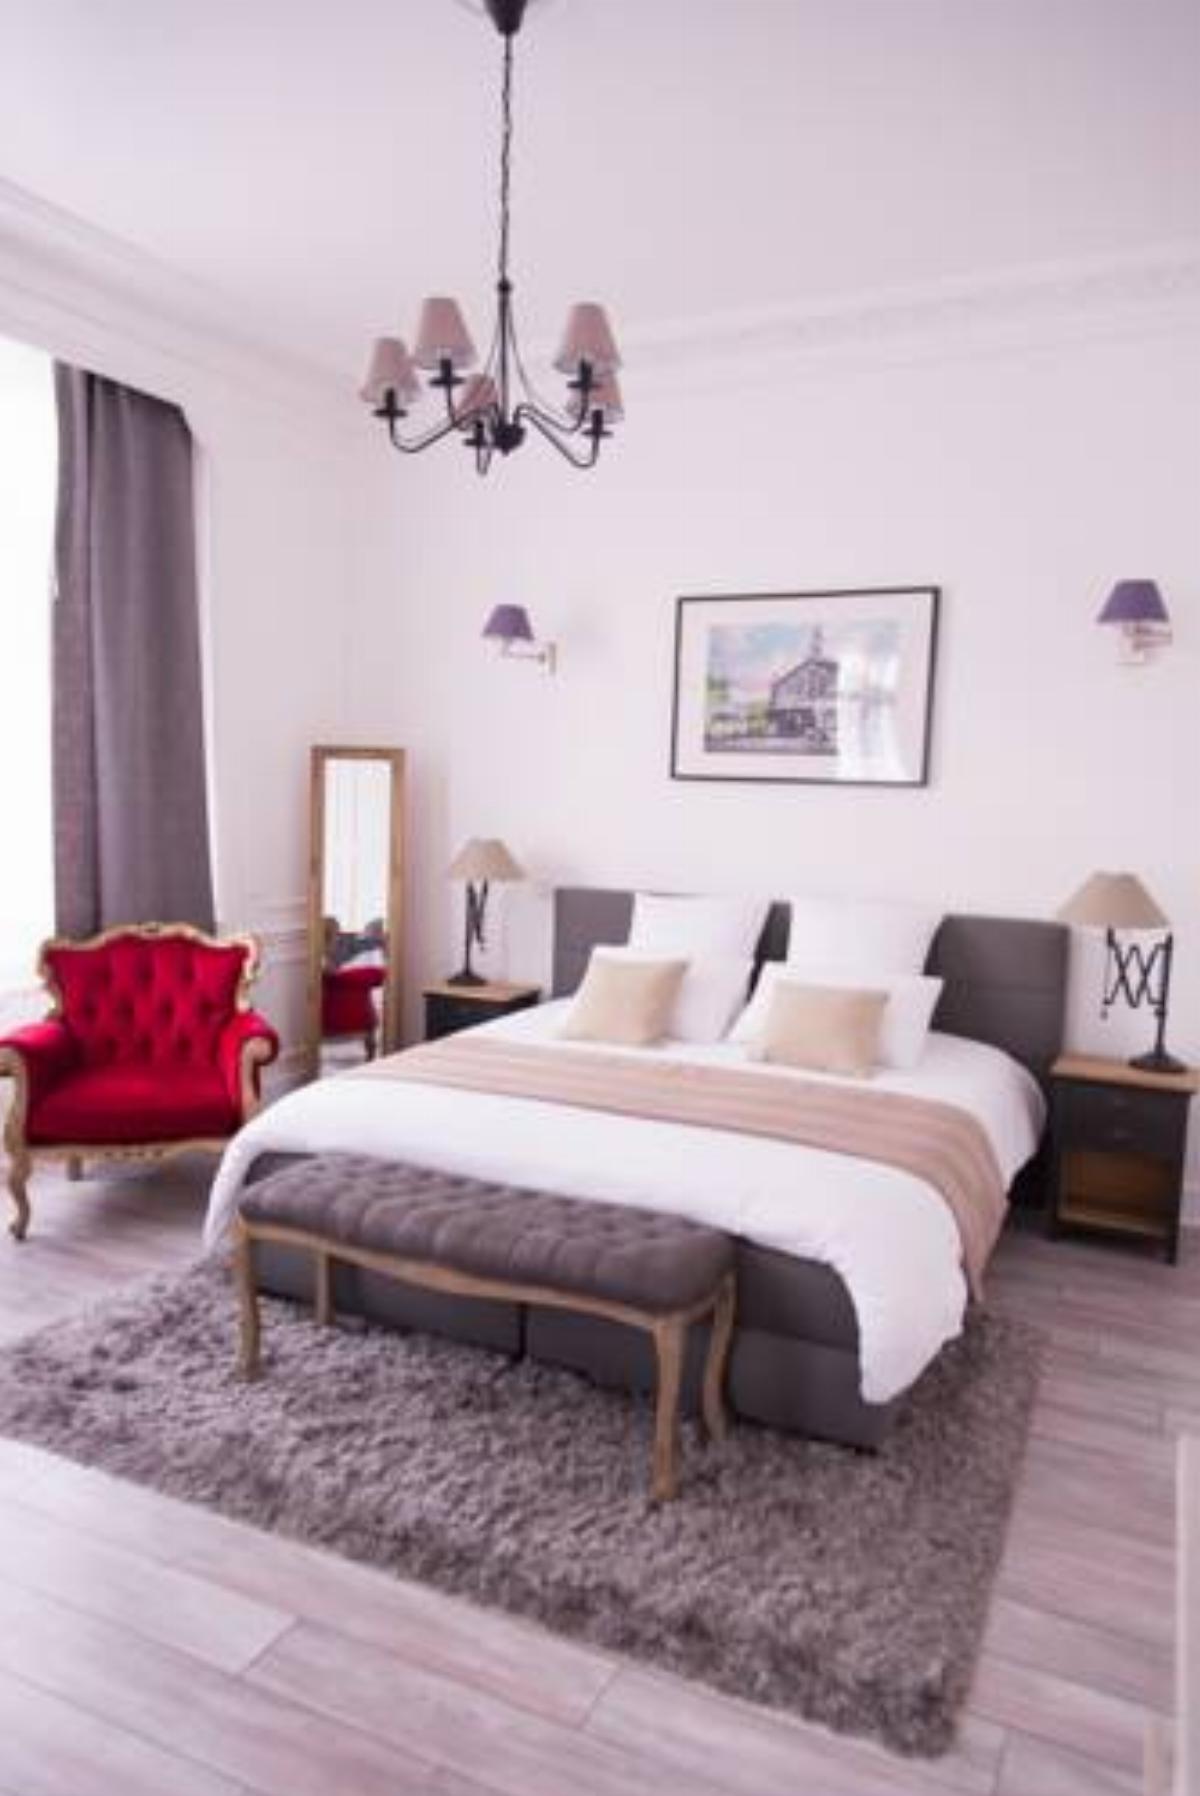 Chic Appart Hotel Tourcoing France